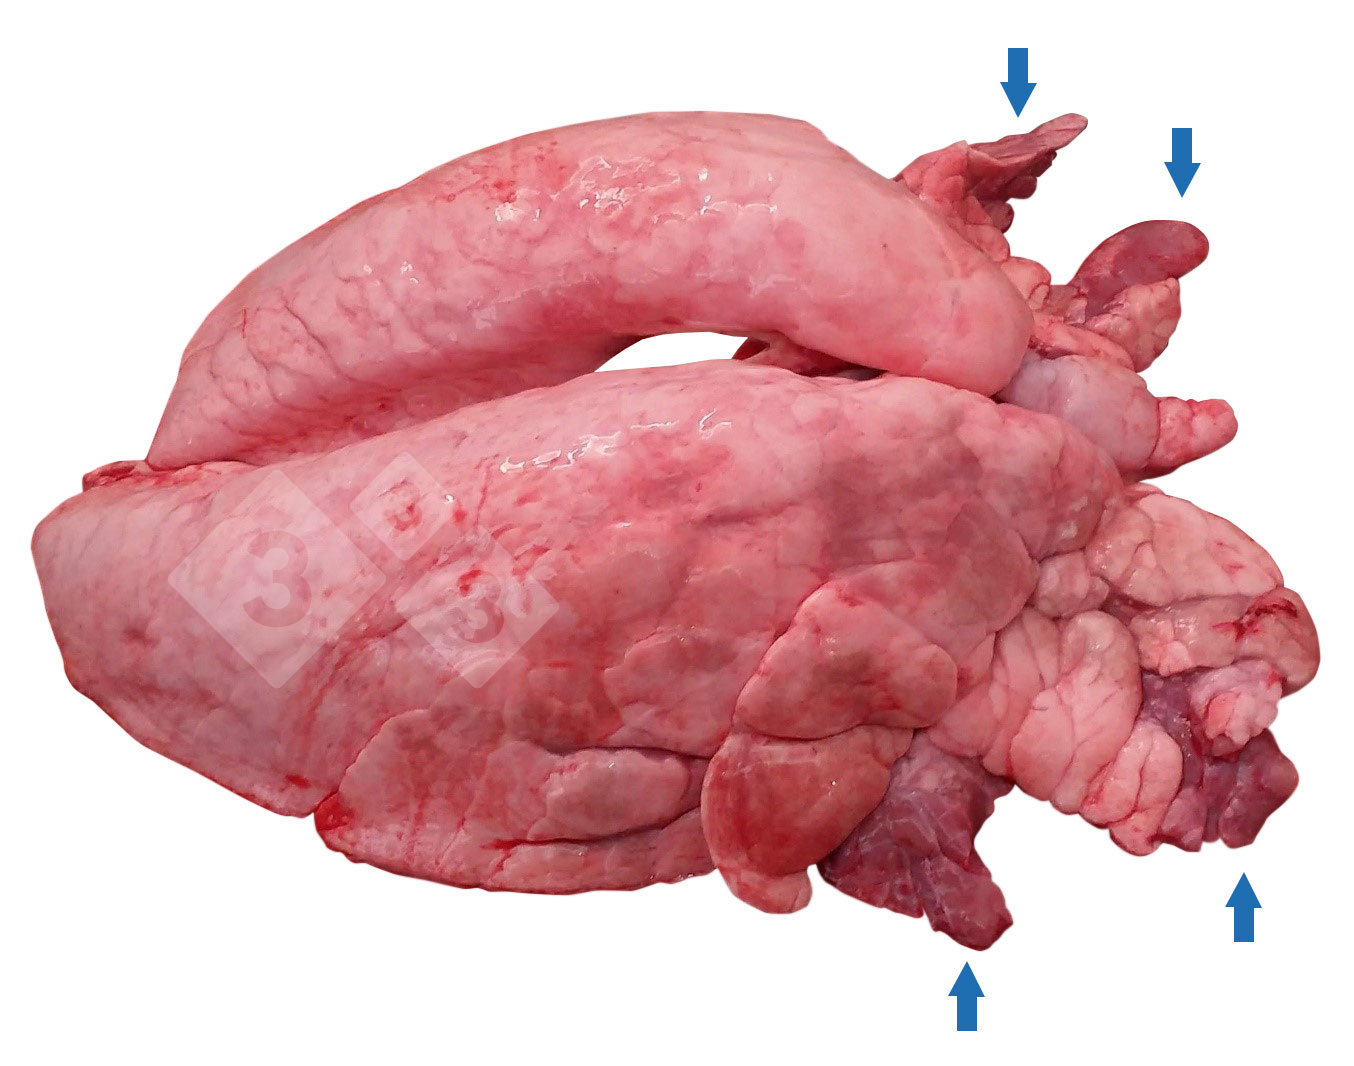 Figure 1. Cranioventral pulmonary consolidation (CVPC) in pig